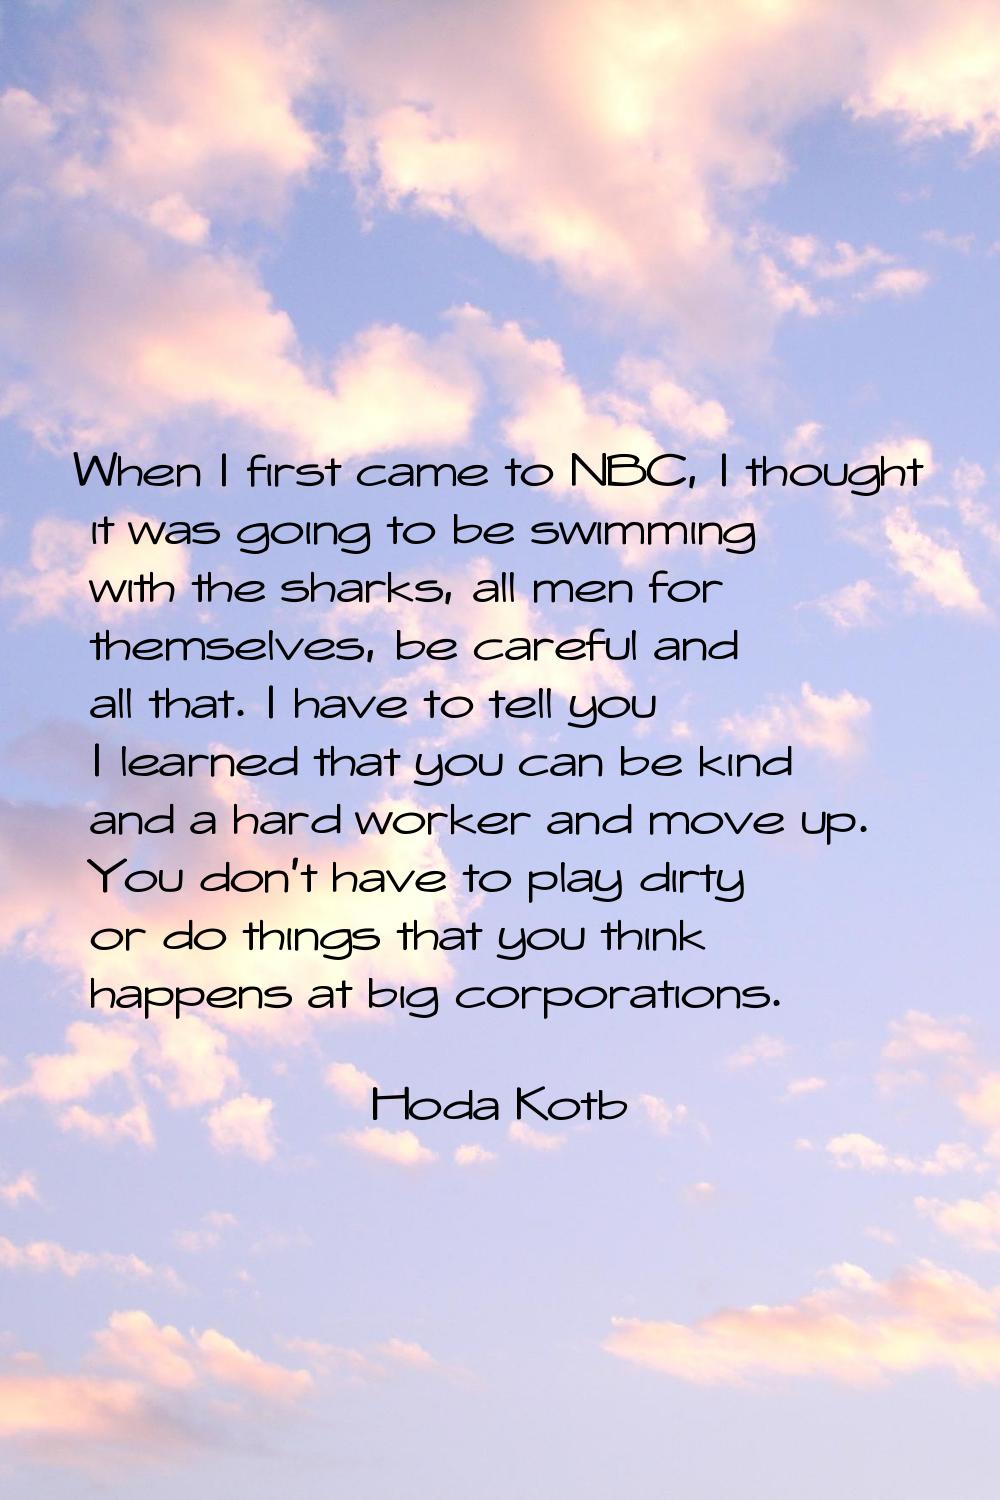 When I first came to NBC, I thought it was going to be swimming with the sharks, all men for themse